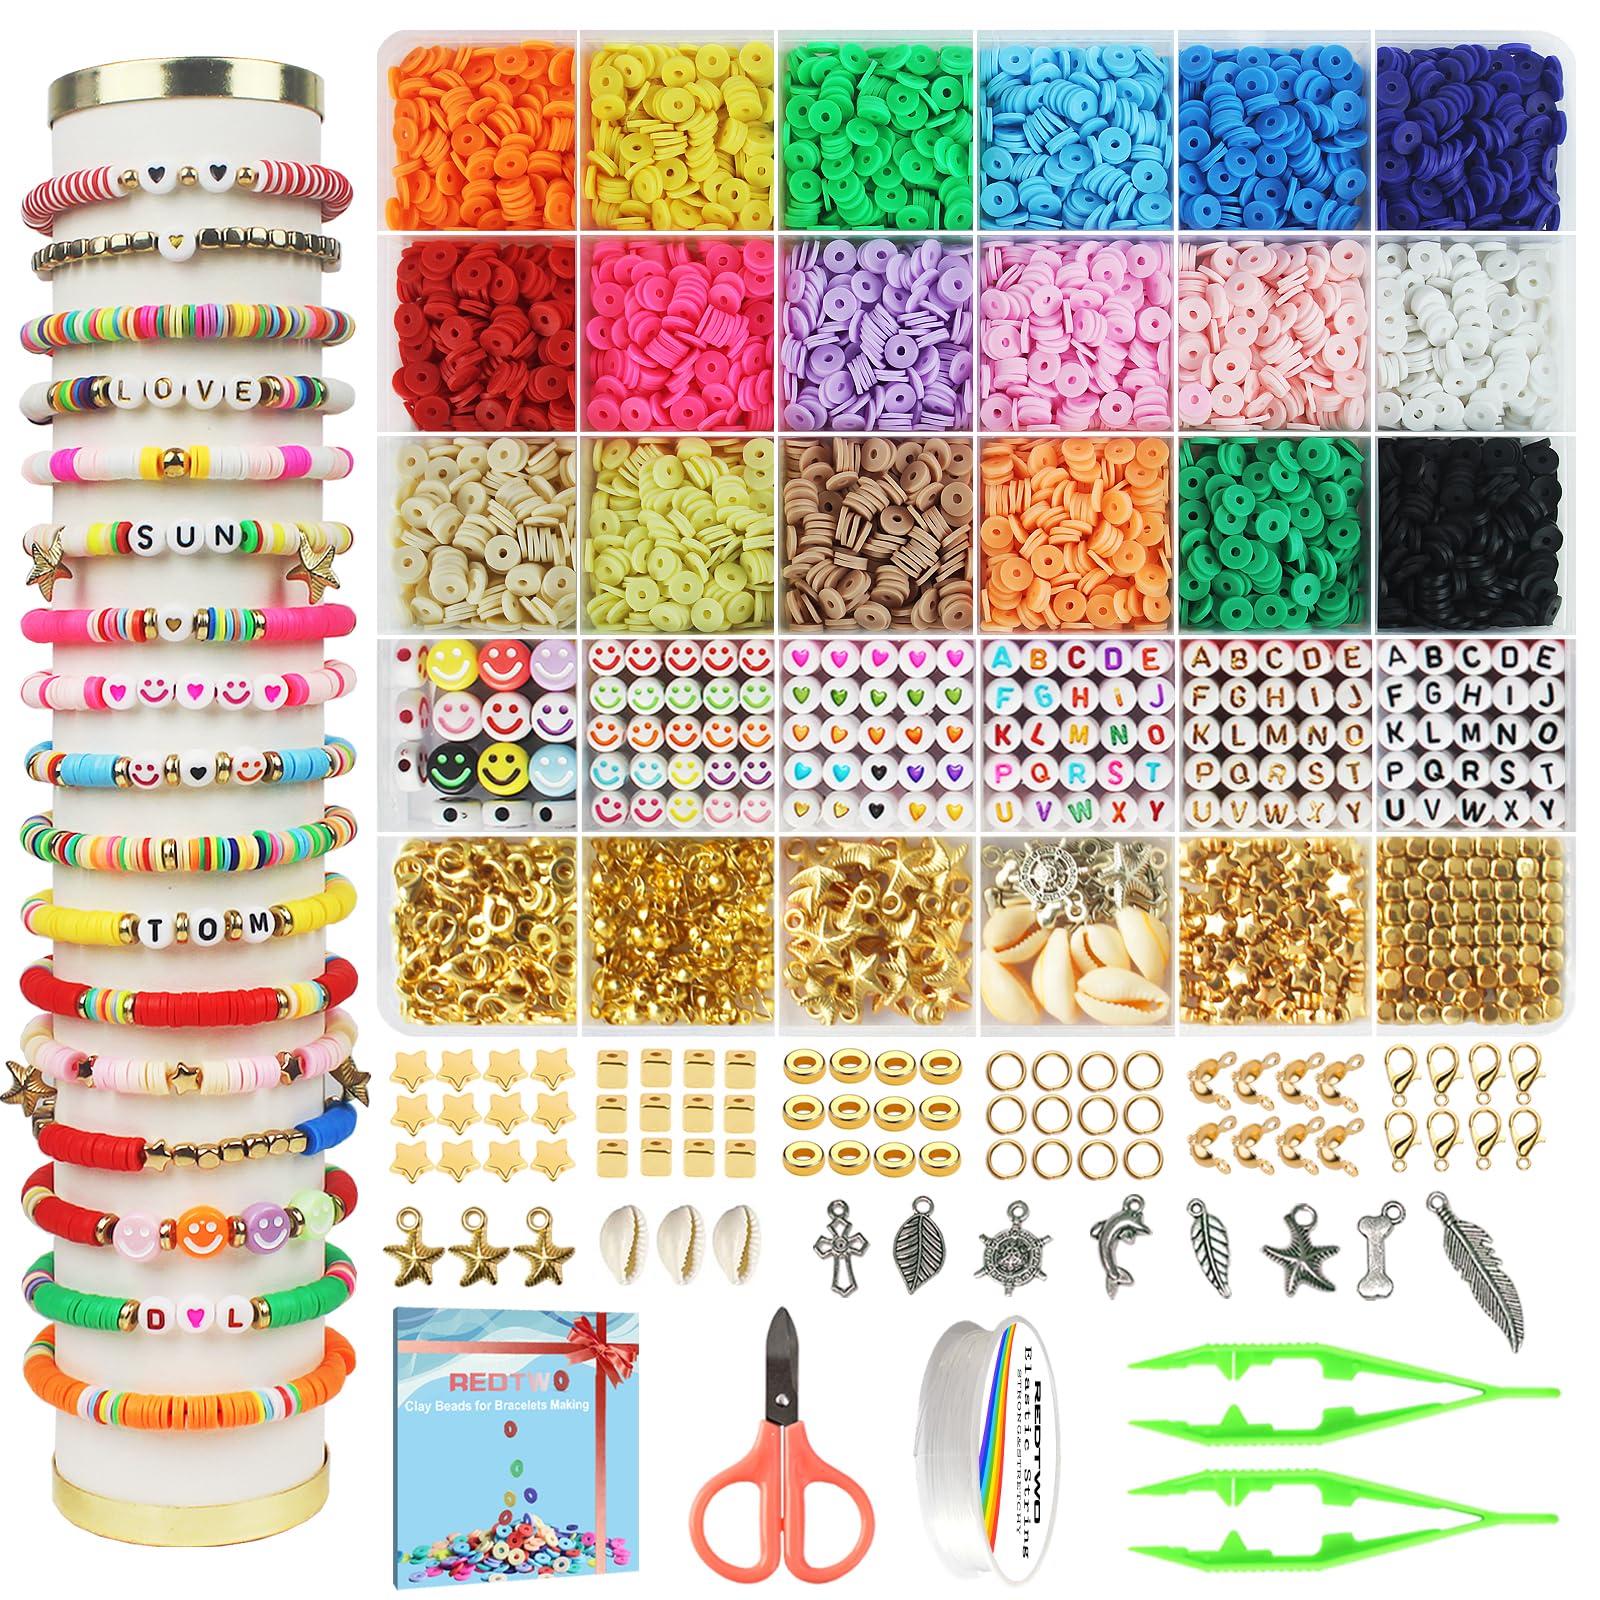 Redtwo 5100 Clay Beads Bracelet Making Kit, Flat Preppy Beads for Friendship Jewelry Making,Polymer Heishi Beads with Charms Gifts for Teen Girls Crafts for Girls Ages 8-12